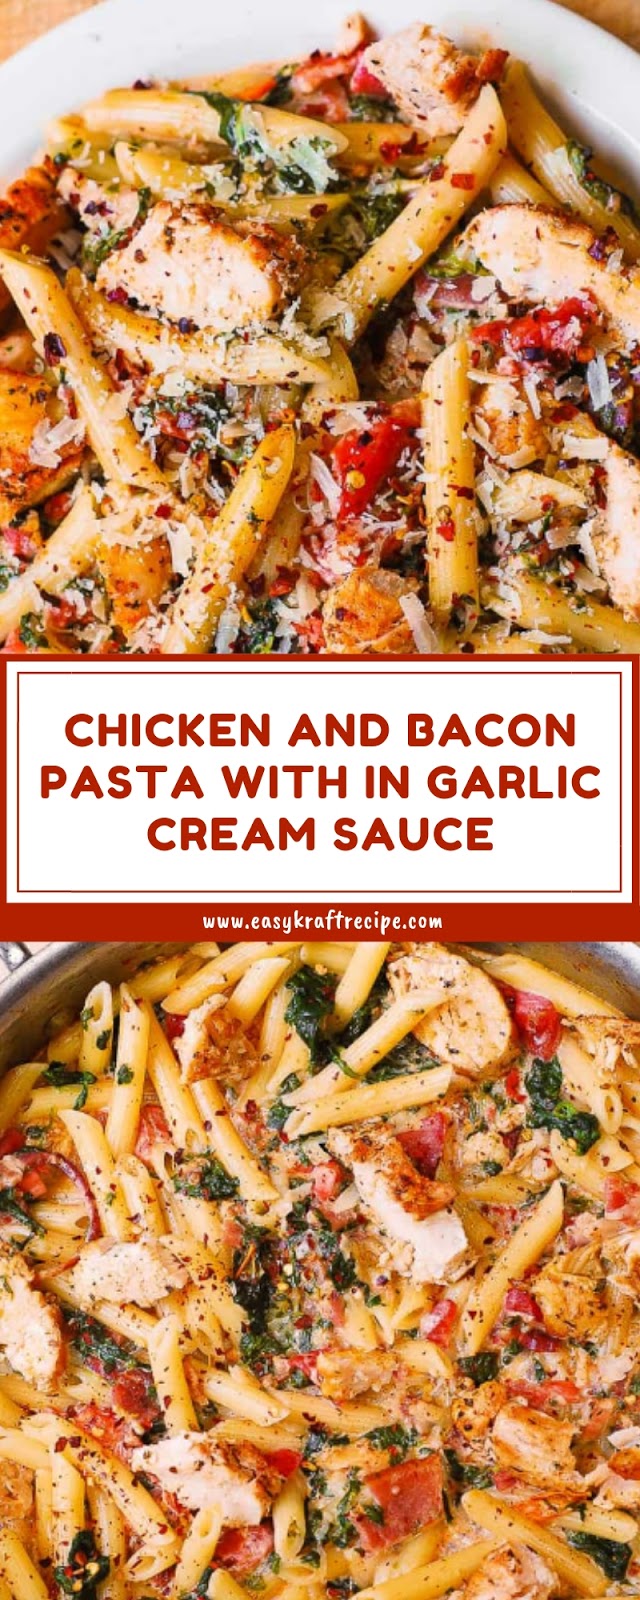 CHICKEN AND BACON PASTA WITH IN GARLIC CREAM SAUCE